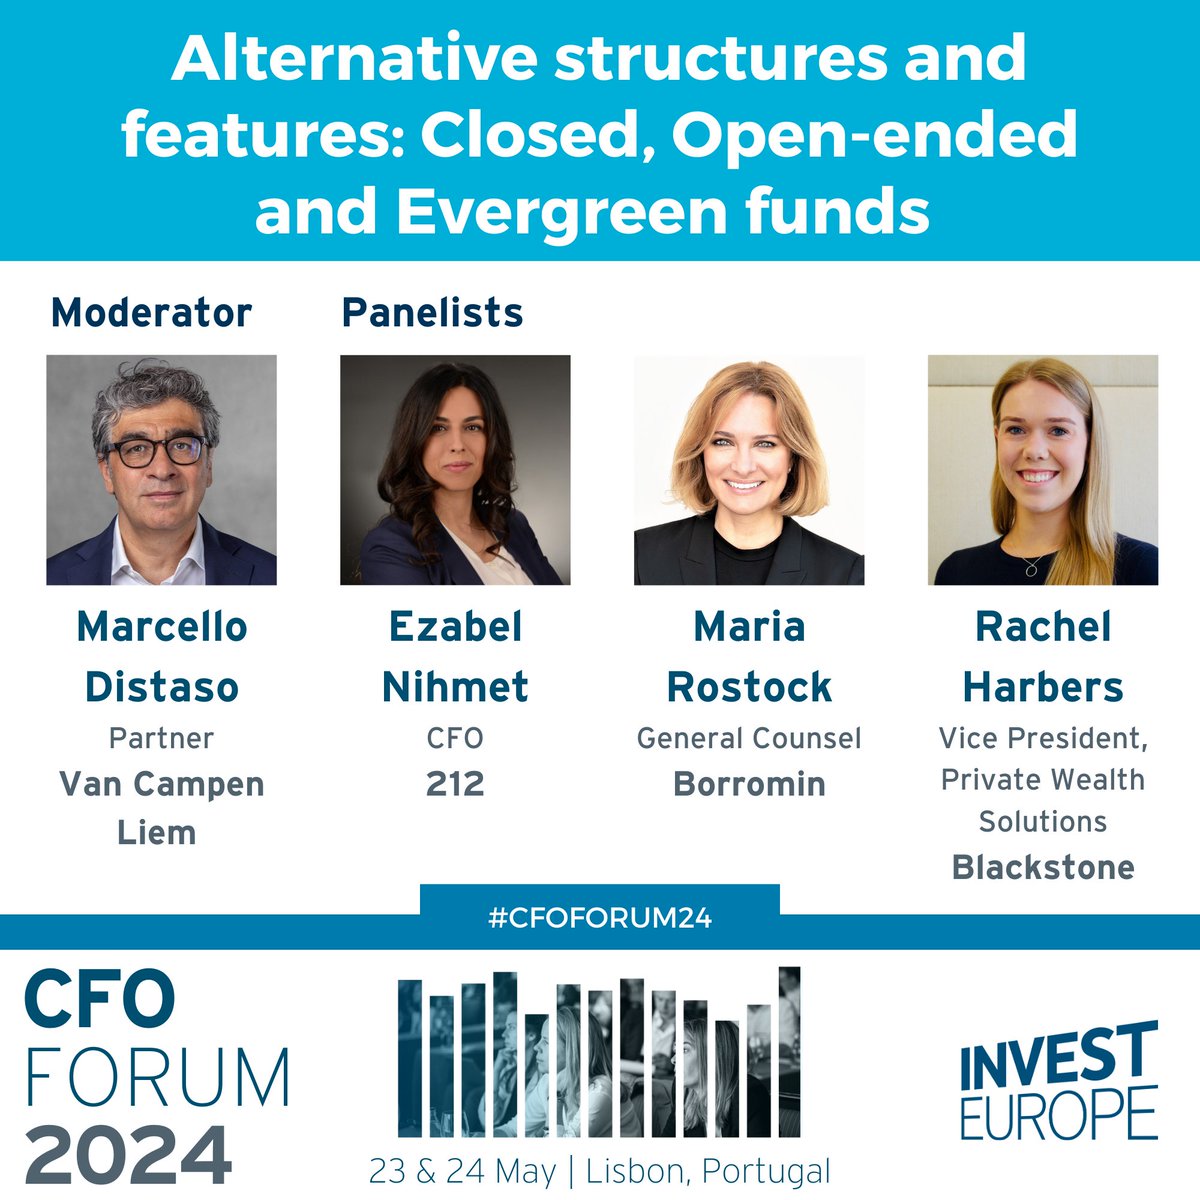 #CFOForum24 on alternative structures and features ⤵️ What are the instruments and structures currently available to the sponsors? What are the key considerations for CFOs in such structures? Register now 👉 cfo.investeurope.eu/registration/ #privateequity #venturecapital